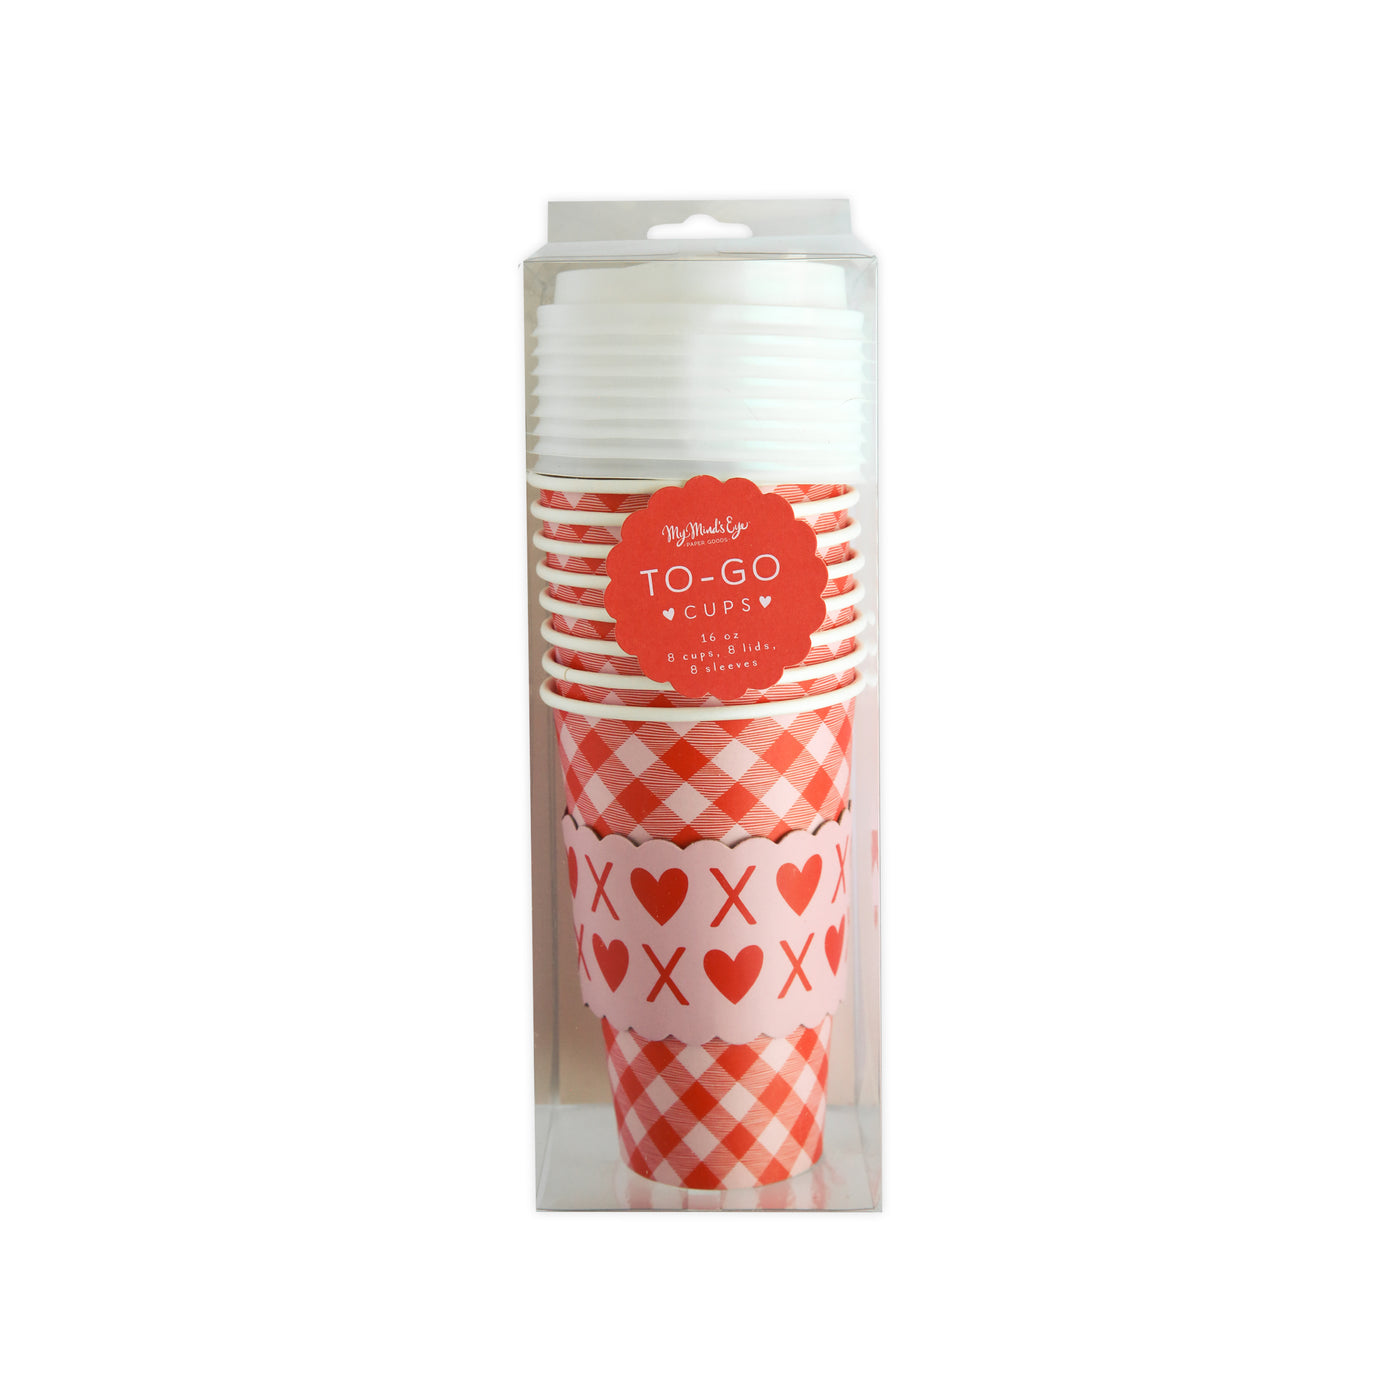 PLLC305 - Red/Pink Gingham To-Go Cups (8 ct)